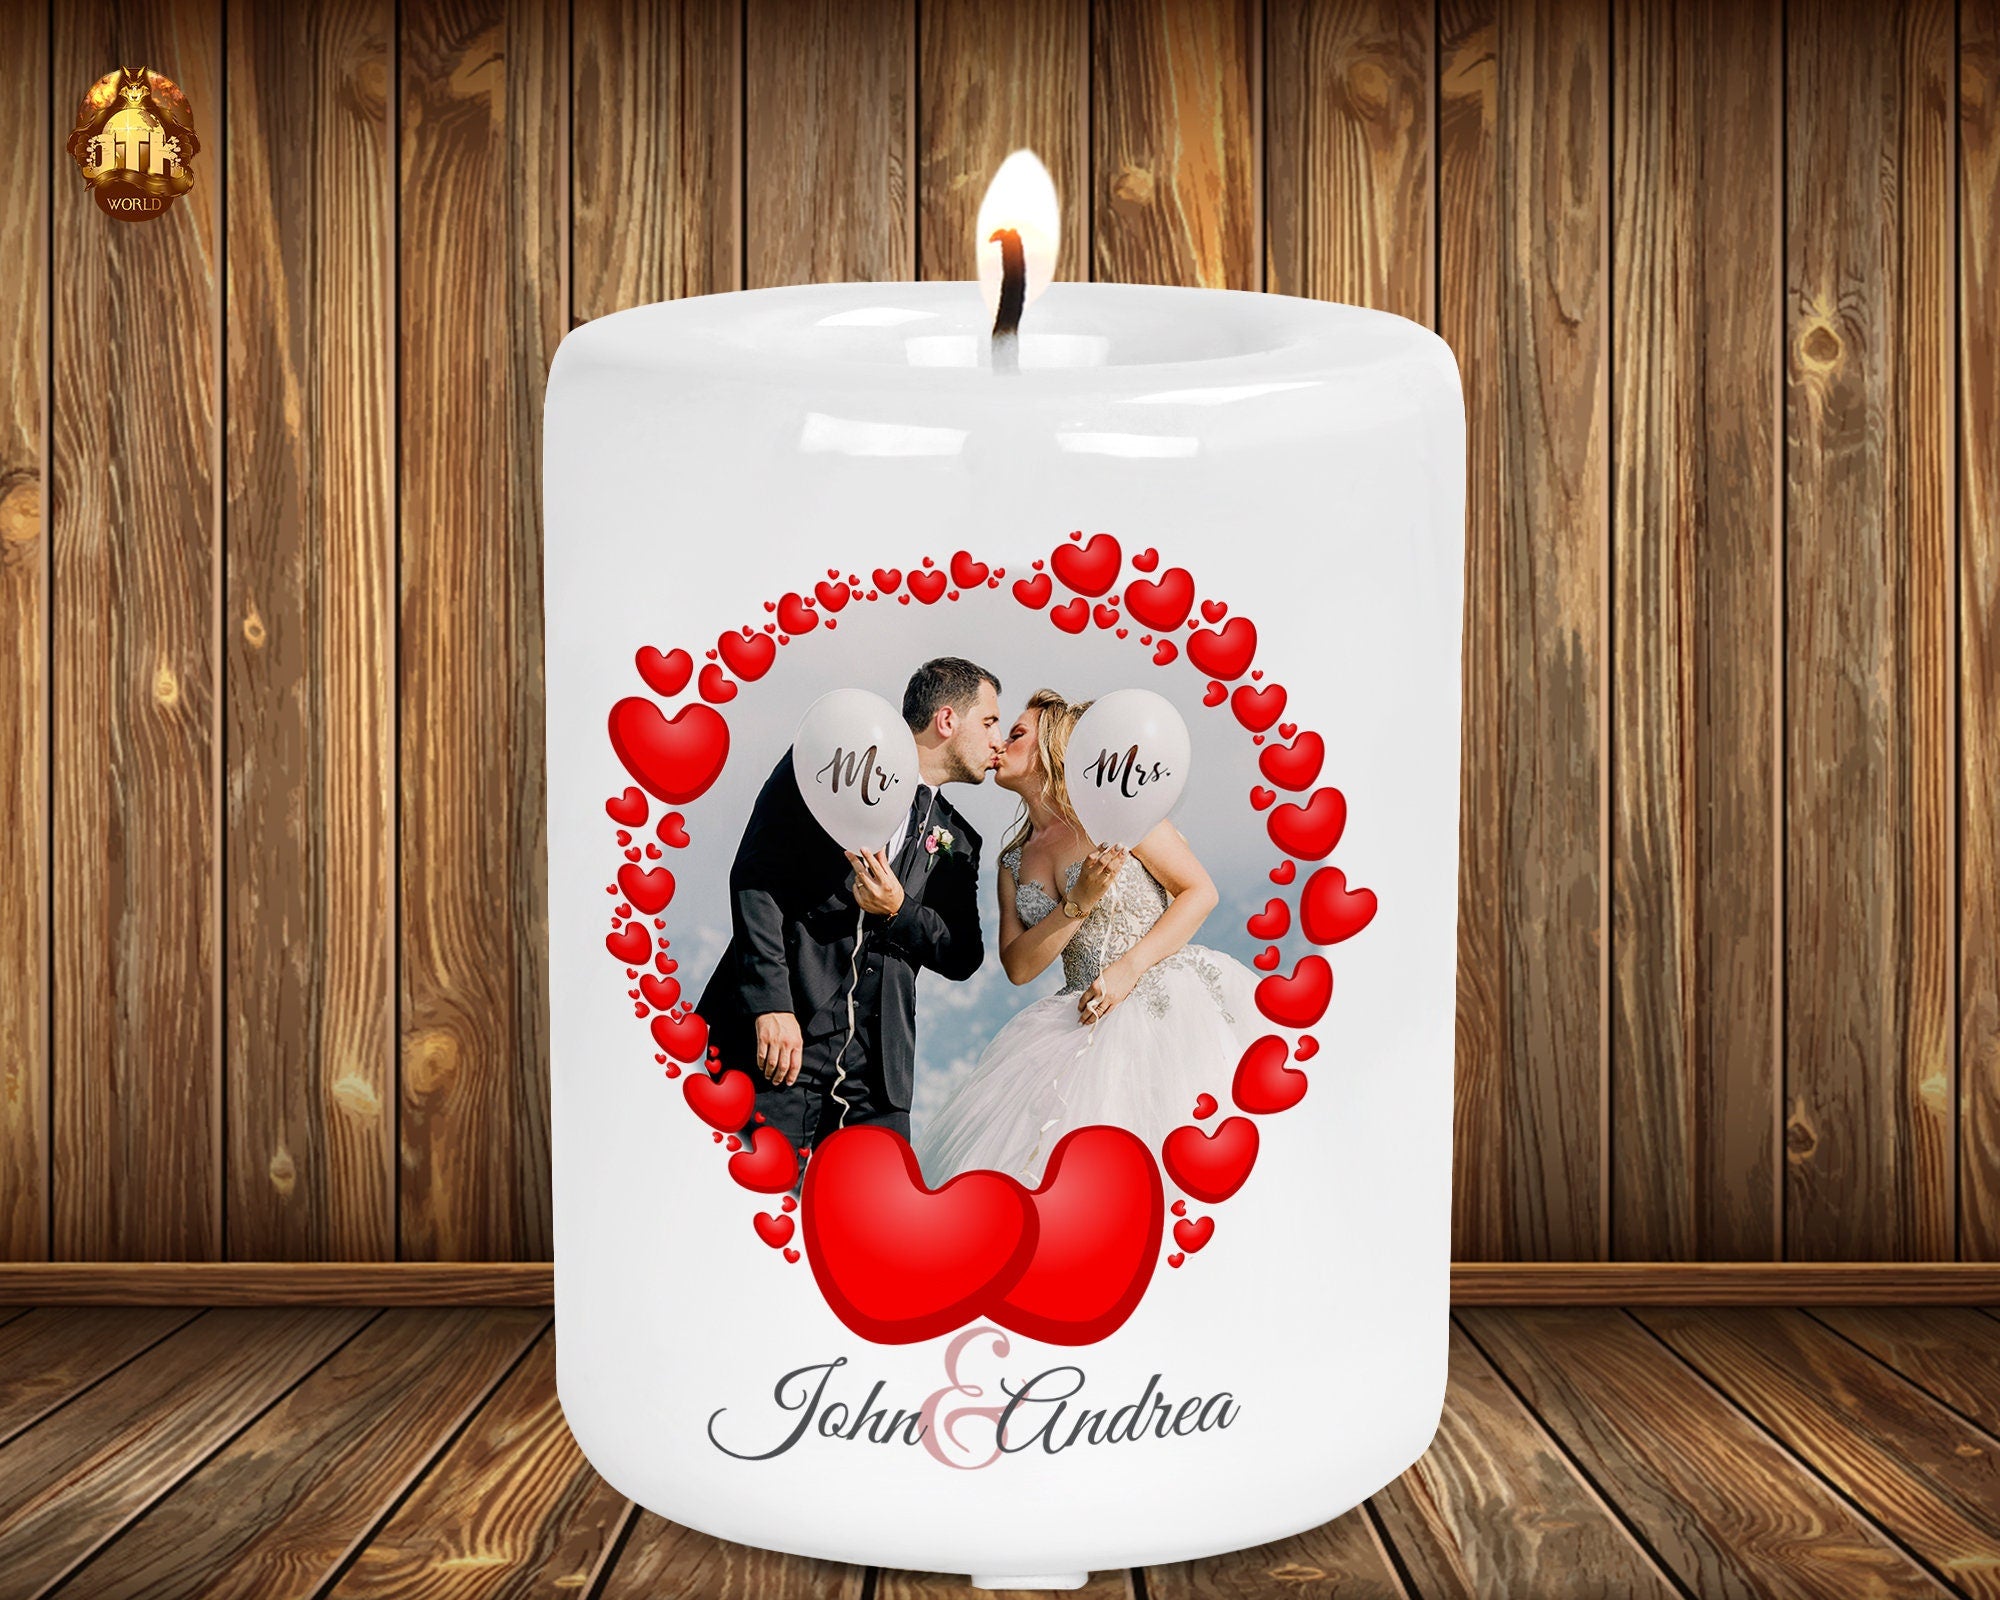 Valentines Personalized Photo Candle 